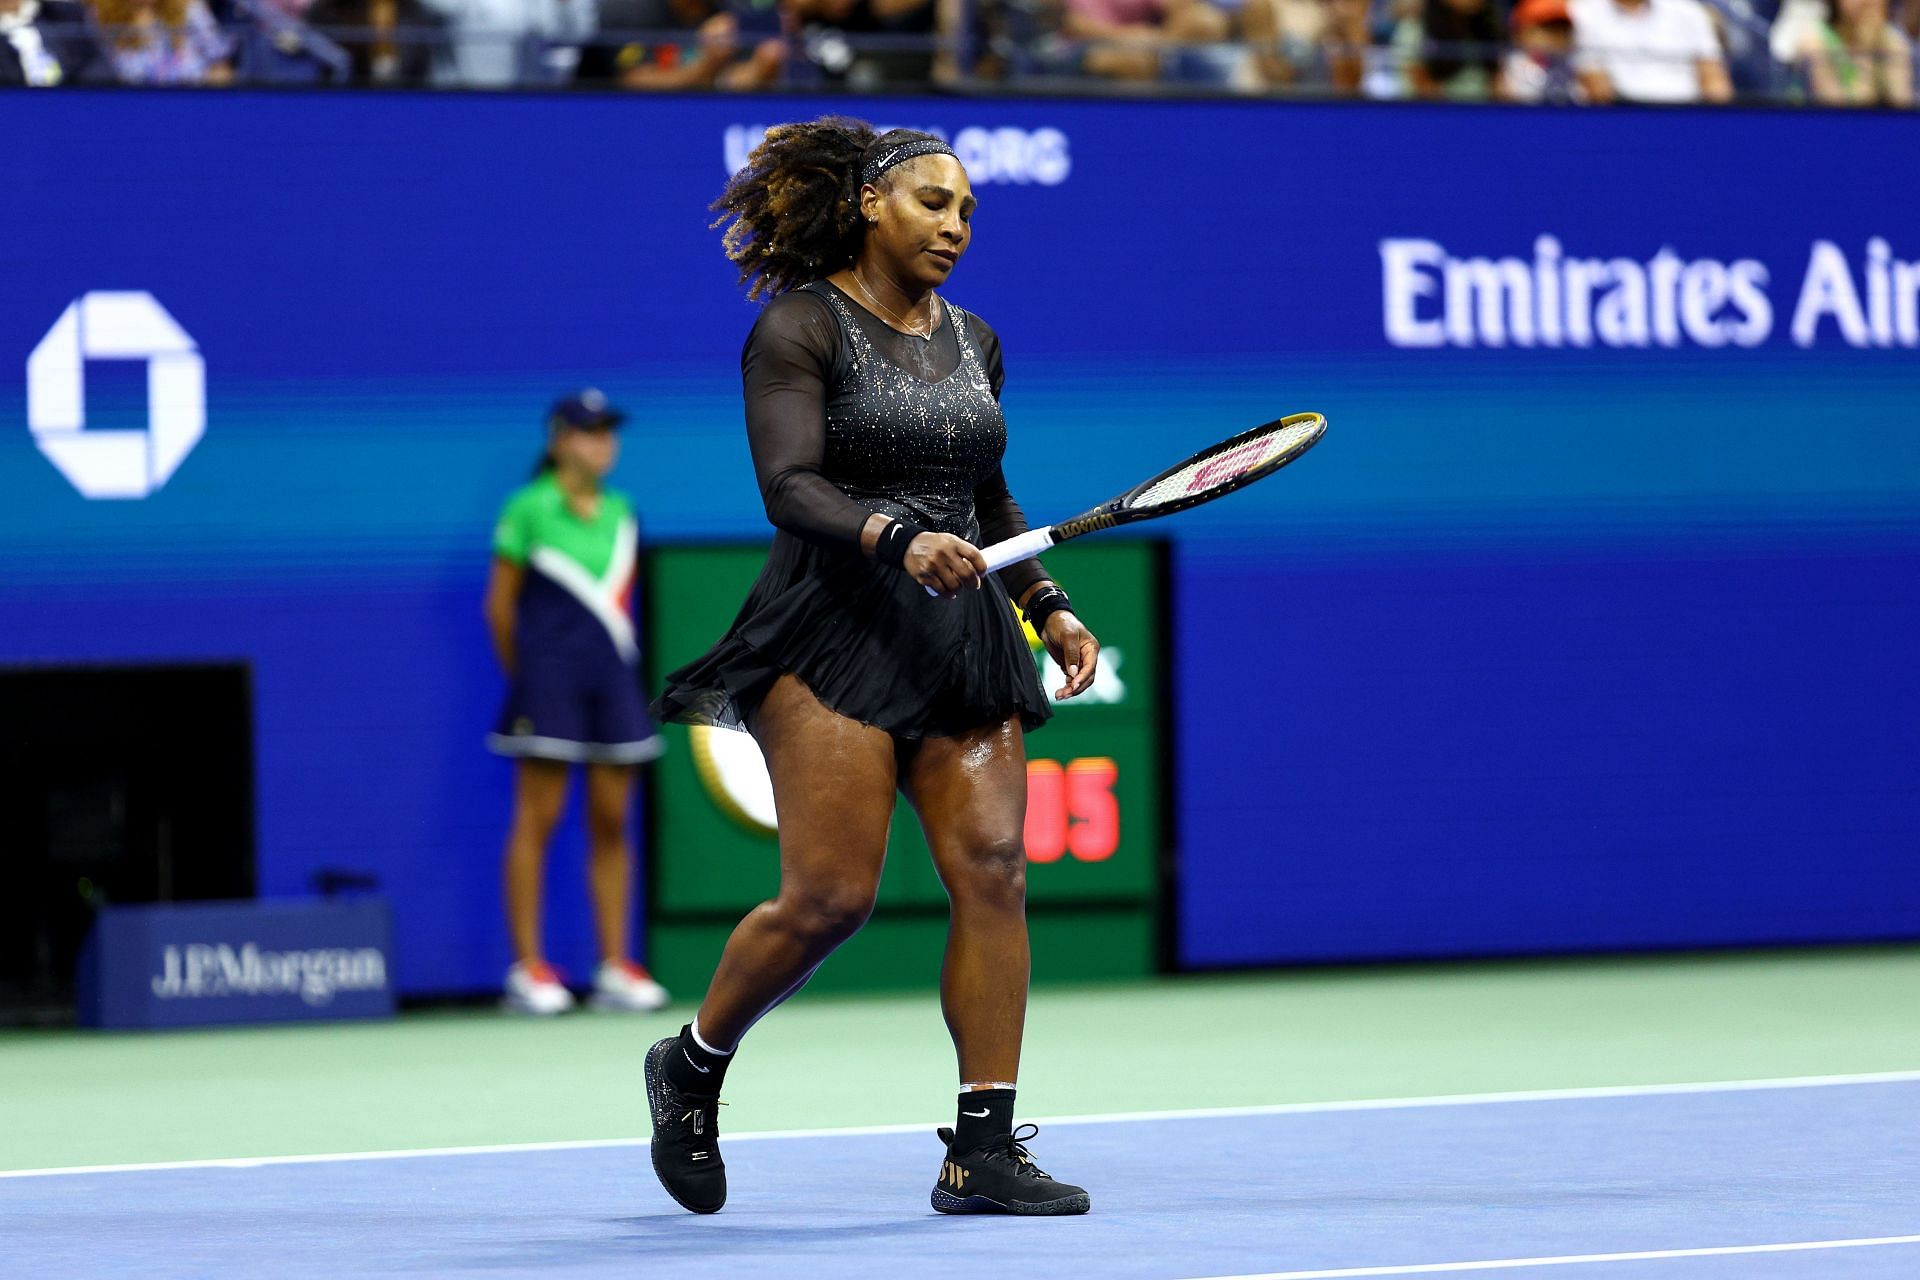 Serena Williams during her third-round match against Ajla Tomlijanovic at the 2022 US Open